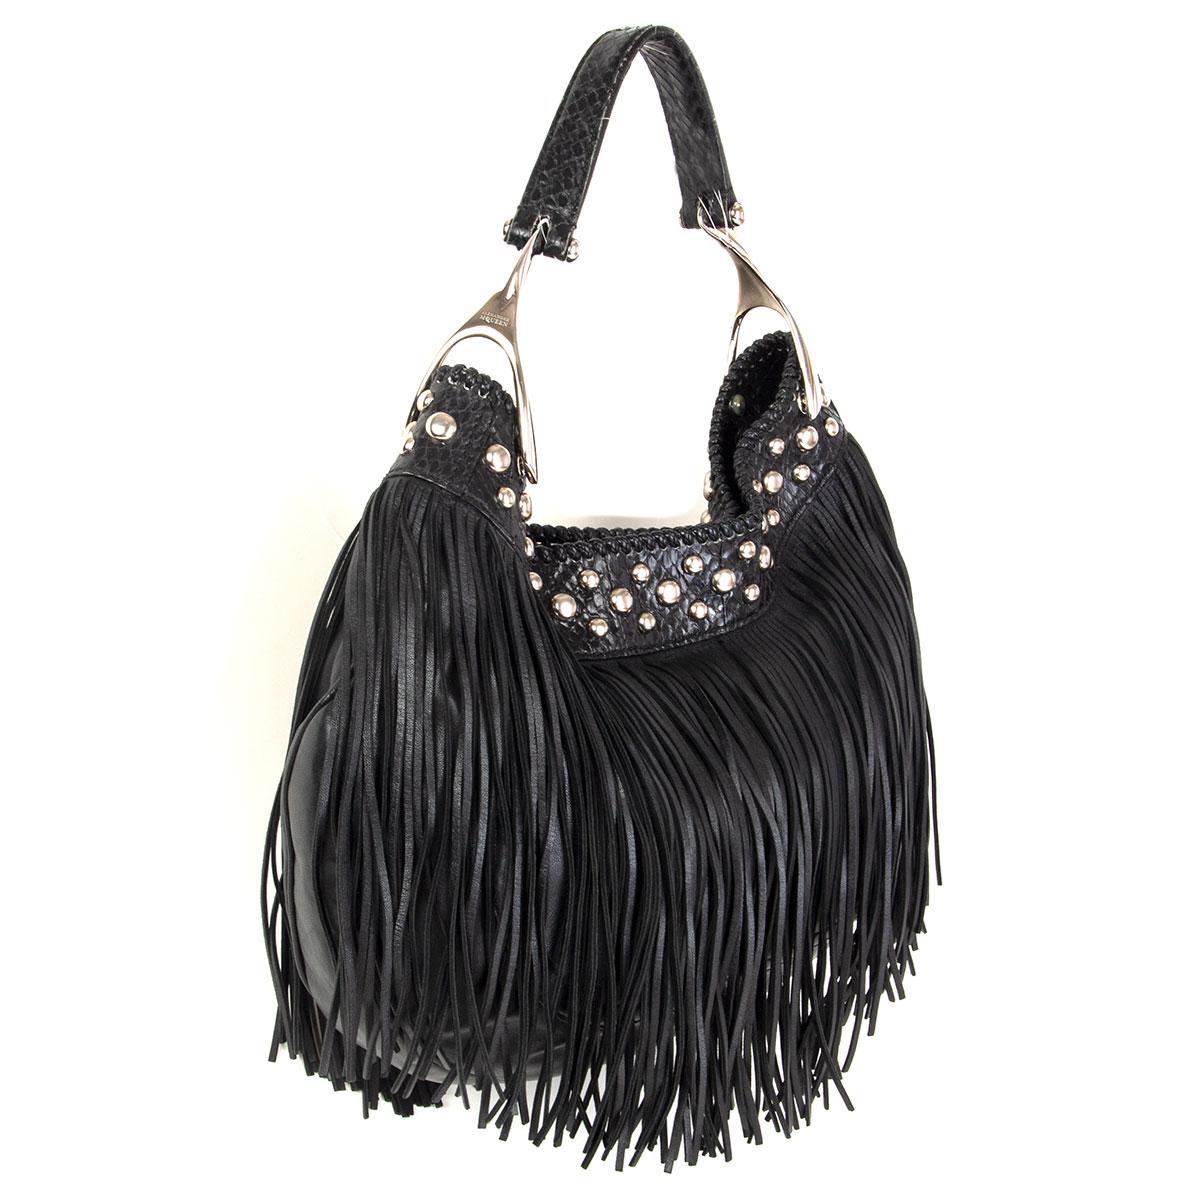 Alexander McQueen 'Wishbone Fringe Hobo' shoulder bag in black smooth calfskin featuring silver-tone studs with python top part and handle. Opens with a hidden magnetic button and is lined in black canvas with one zipper pocket against the back. Has